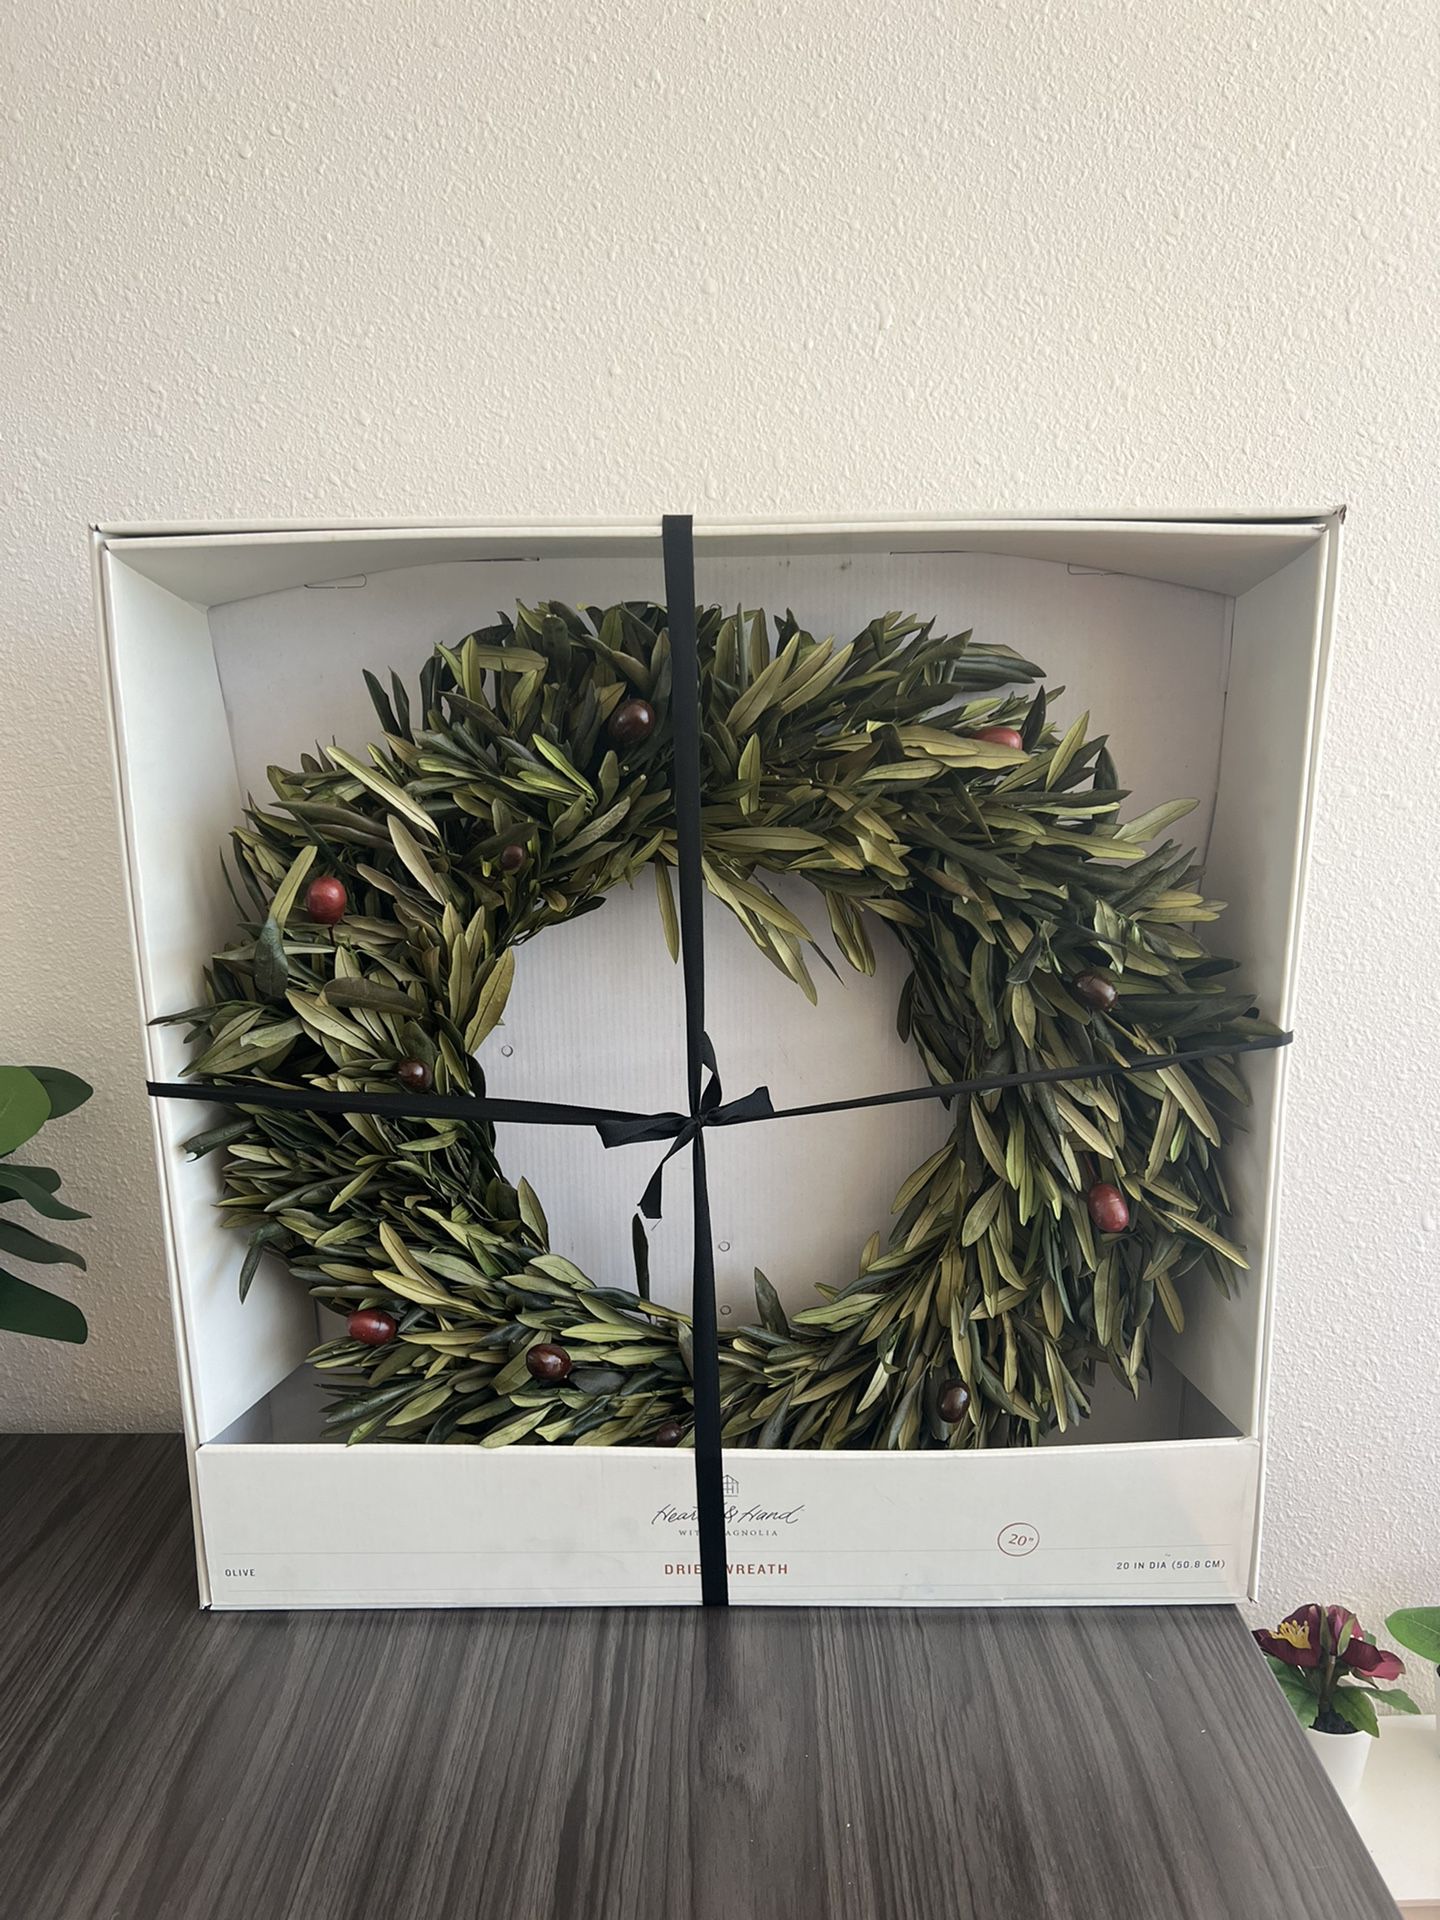 20" Preserved Olive Leaf Plant Wreath - Hearth & Hand with Magnolia